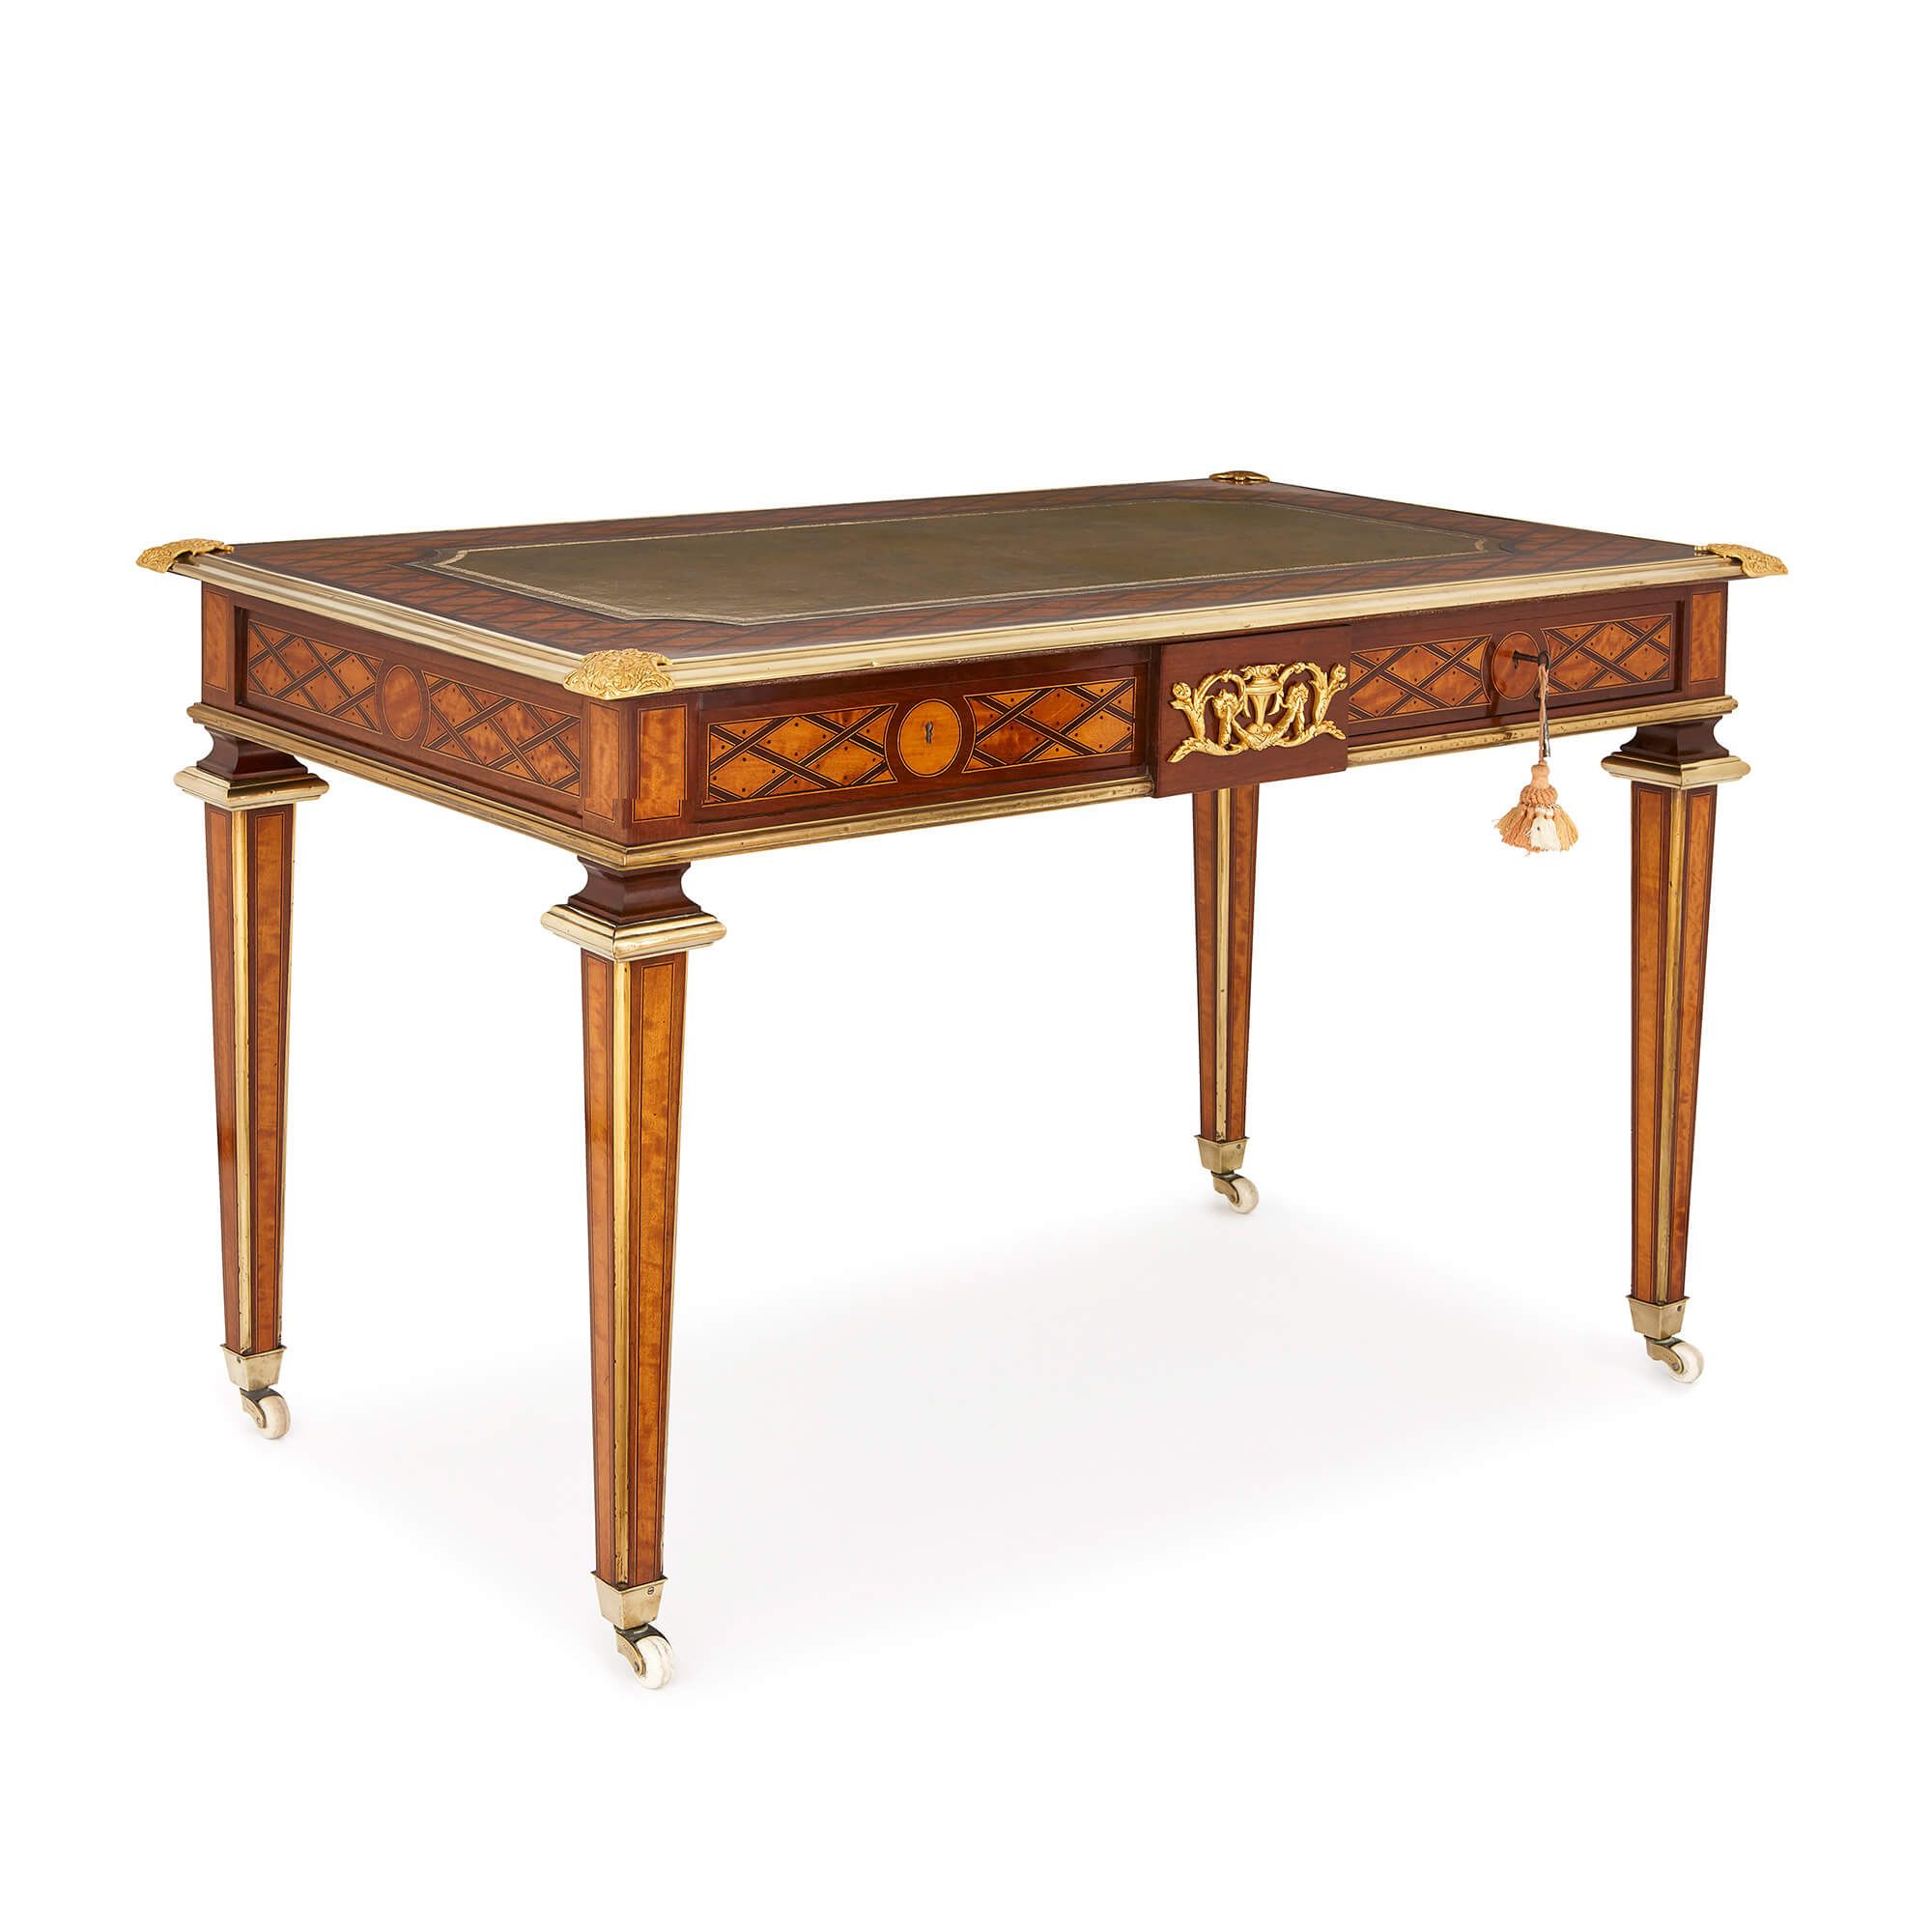 Antique Victorian Ormolu And Parquetry Desk Mayfair Gallery